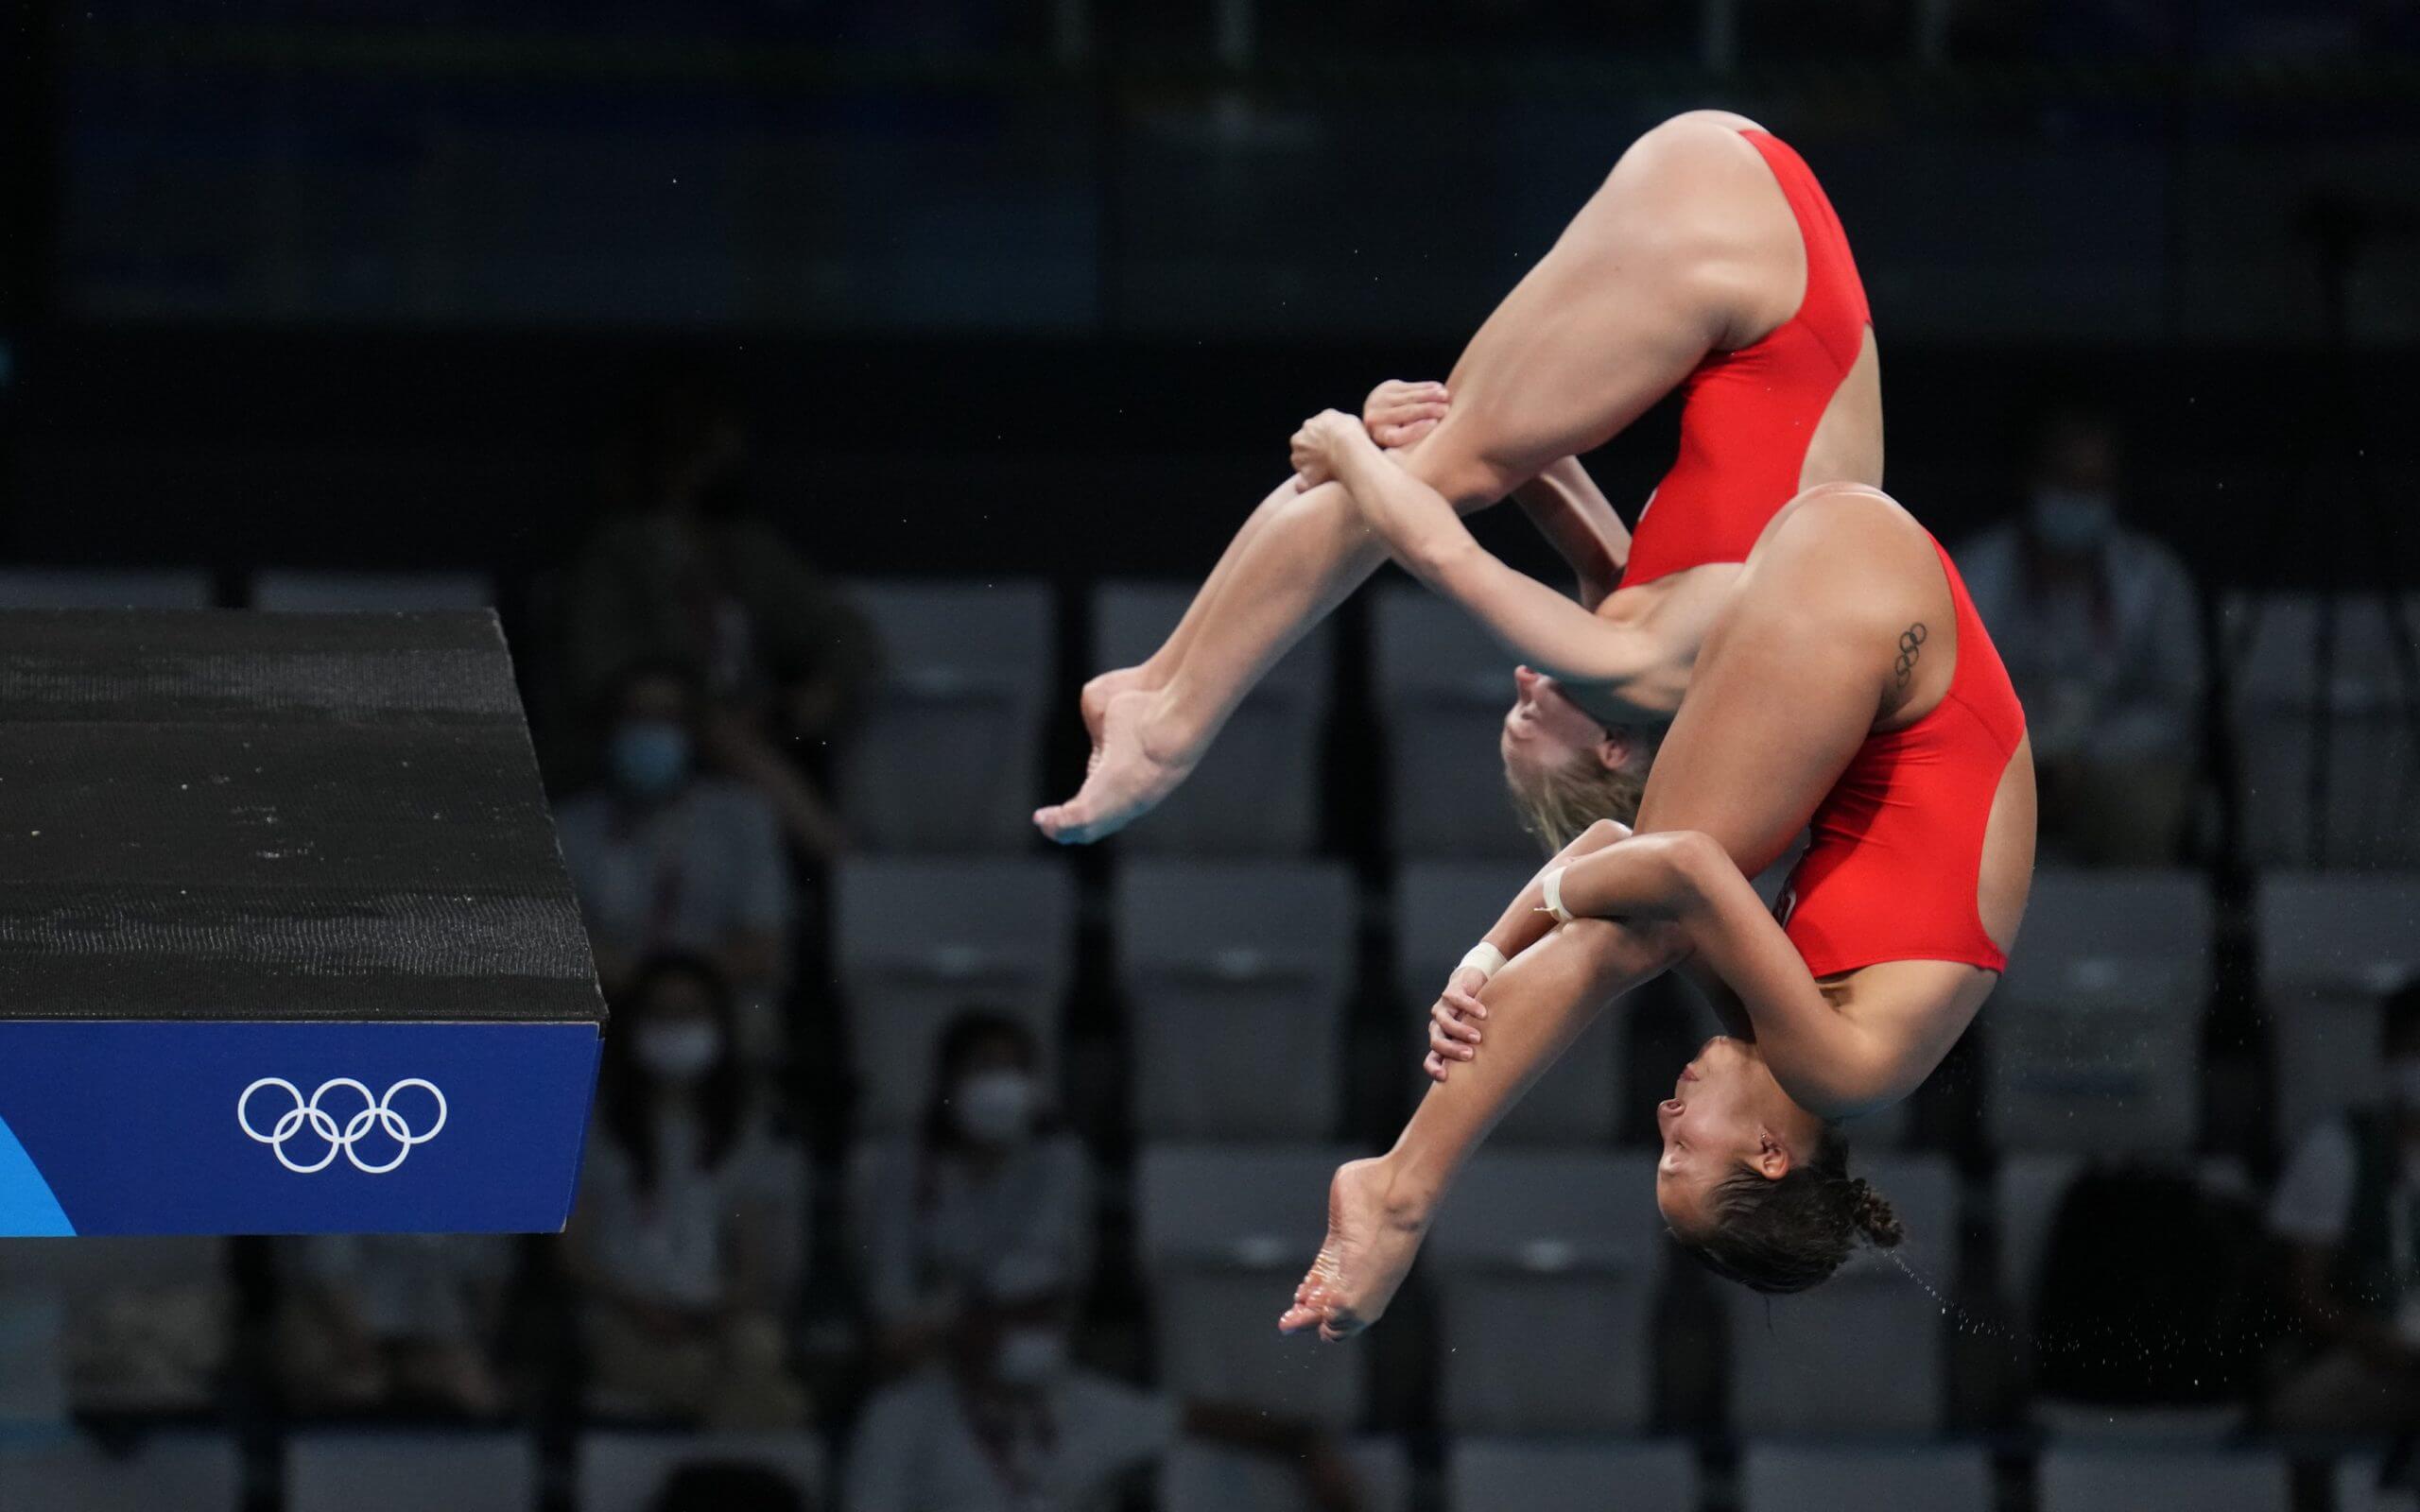 Jul 27, 2021; Tokyo, Japan; Jessica Parratto and Delaney Schnell (USA) in the women's 10m platform synchronized diving competition during the Tokyo 2020 Olympic Summer Games at Tokyo Aquatics Centre. Mandatory Credit: Robert Hanashiro-USA TODAY Sports